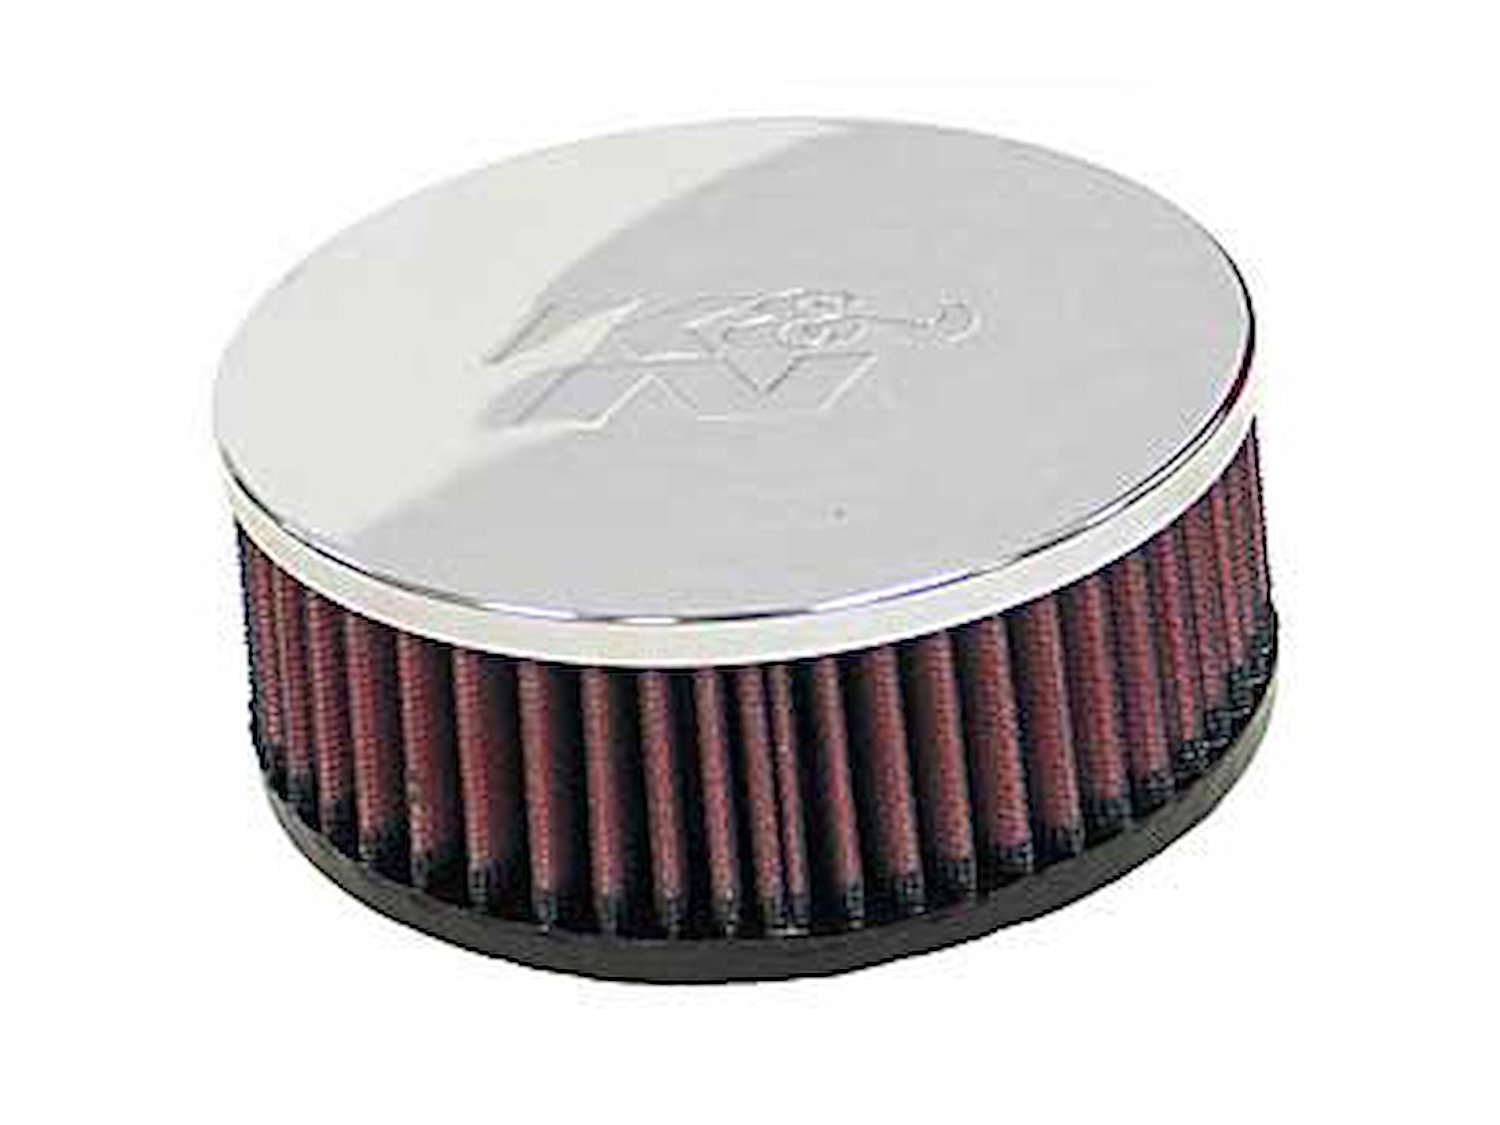 Round Straight Air Filter Flange Dia. (F): 2.75" (70 mm)